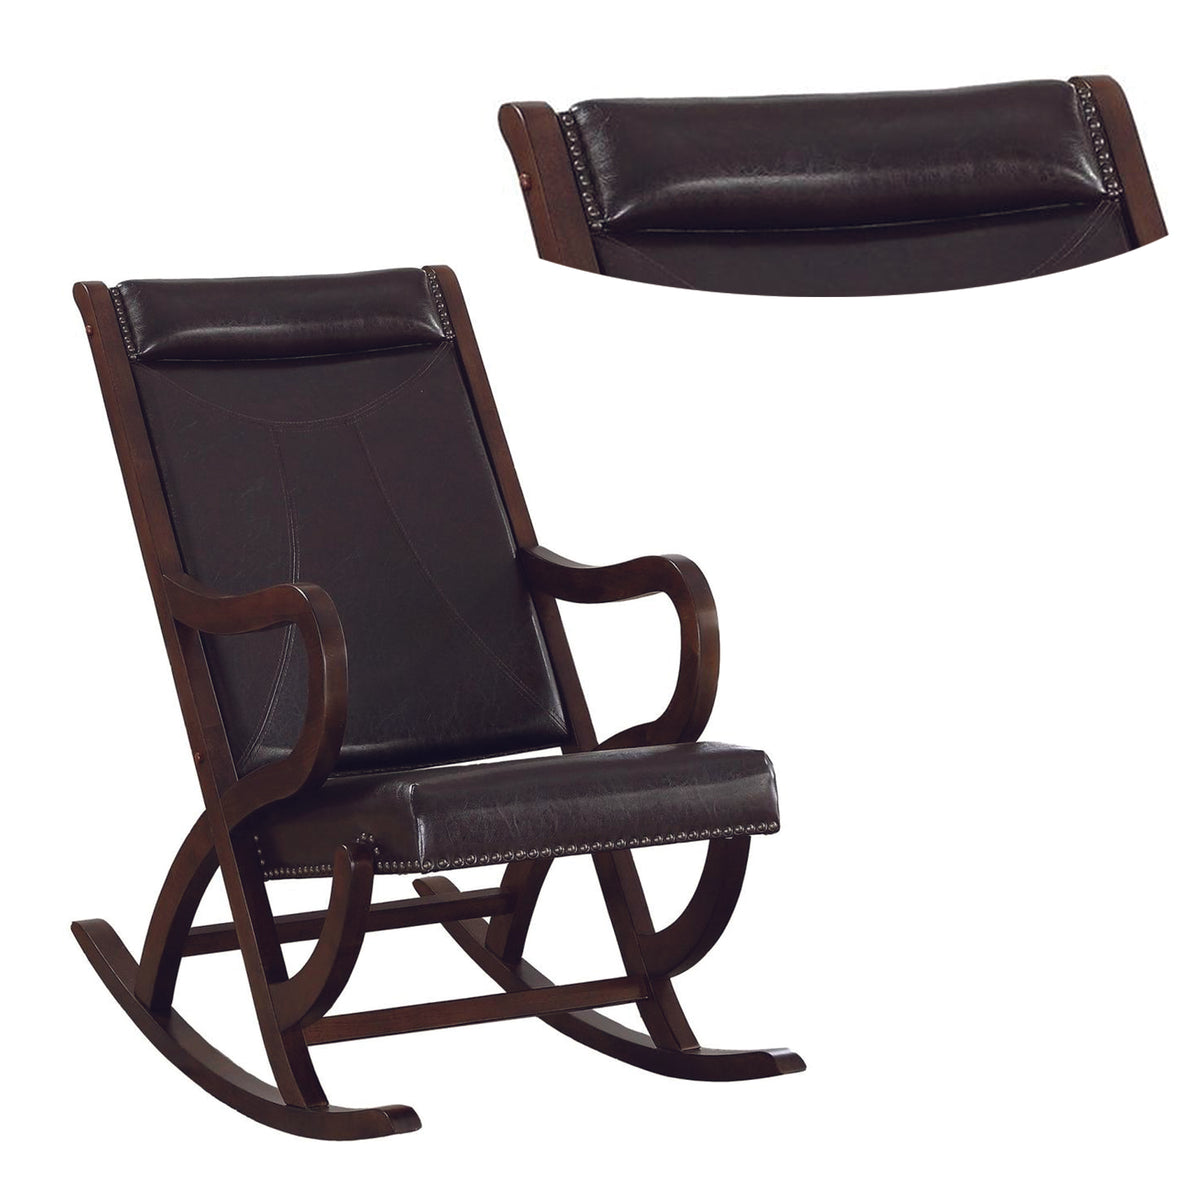 BM193886 -Faux Leather Upholstered Wooden Rocking Chair with Looped Arms, Brown